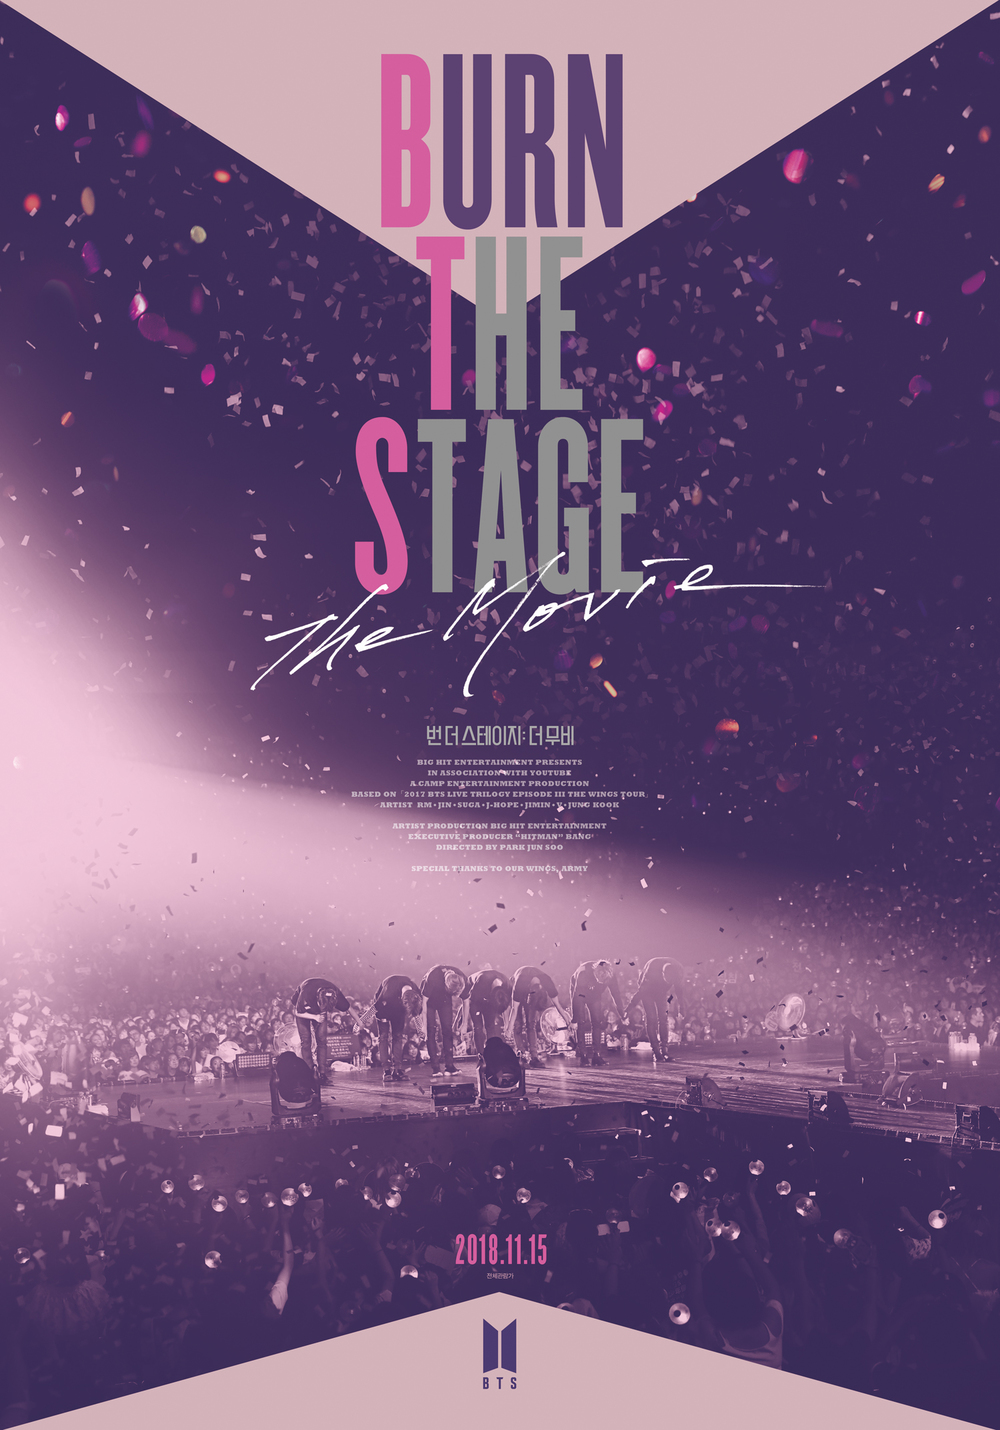 BTS first film, Bun the Stage: The Movie, has captured audiences around the world.BTS first film, Bun the Stage: The Movie, which was released in more than 70 countries and regions around the world, including the CGV theater nationwide on November 15, has made a brilliant screen debut with 310,000 domestic audiences and 196 million worldwide audiences.The Bun the Stage: The Movie, which attracted worldwide attention as the first film of BTS, has started a good start with 150,000 pre-release tickets in Korea, 76,000 spectators on the opening day, and 4th in the box office rankings.In particular, the seat sales rate has remained at two digits during the screening period and has emerged as a dark horse in the off-season theater.Bun the Stage: The Movie, which has surpassed 310,000 viewers in Korea through its screening for about three weeks on November 15, mobilized the largest number of Korean Music documentary releases.Also, Bun the Stage: The Movie has been a remarkable achievement abroad.Forbes introduced the film, posting an article titled 55 years from Beatles, BTS After The Beatles, BTS Is Ready For Its Hollywood Moment).In another Forbes article, BTS said, This time, we have conquered the movie screen. Bun the Stage: The Movie broke the record set by One Direction in 2014 and broke the record of the best sales of Music event cinema production.We ranked 10th on the box office chart in the US weekend gross income, he said.In addition, many local media outlets, including Variety and Teen Vogue, have reported news of Bun the Stage: The Movie in succession.The article praised BTS film screen debut with the expression BTSs movies reveal global cinema and It shows their Music that connects the fans of the world with deep light of BTS who are recognized by everyone and their dedication of members.Bun the Stage: The Movie is the first film of BTS to capture the closest 2017 BTS Live Trilogy Episode 3 Wings Tour (2017 BTS LIVE TRILOGY EPISODE III THE WINGS TOUR, a passionate moment of the Wings Tour, which has 19 cities, 40 performances, 550,000 seats Not only that, but also the everyday moments and honest interviews of the members are filled in 83 minutes of running time.pear hyo-ju